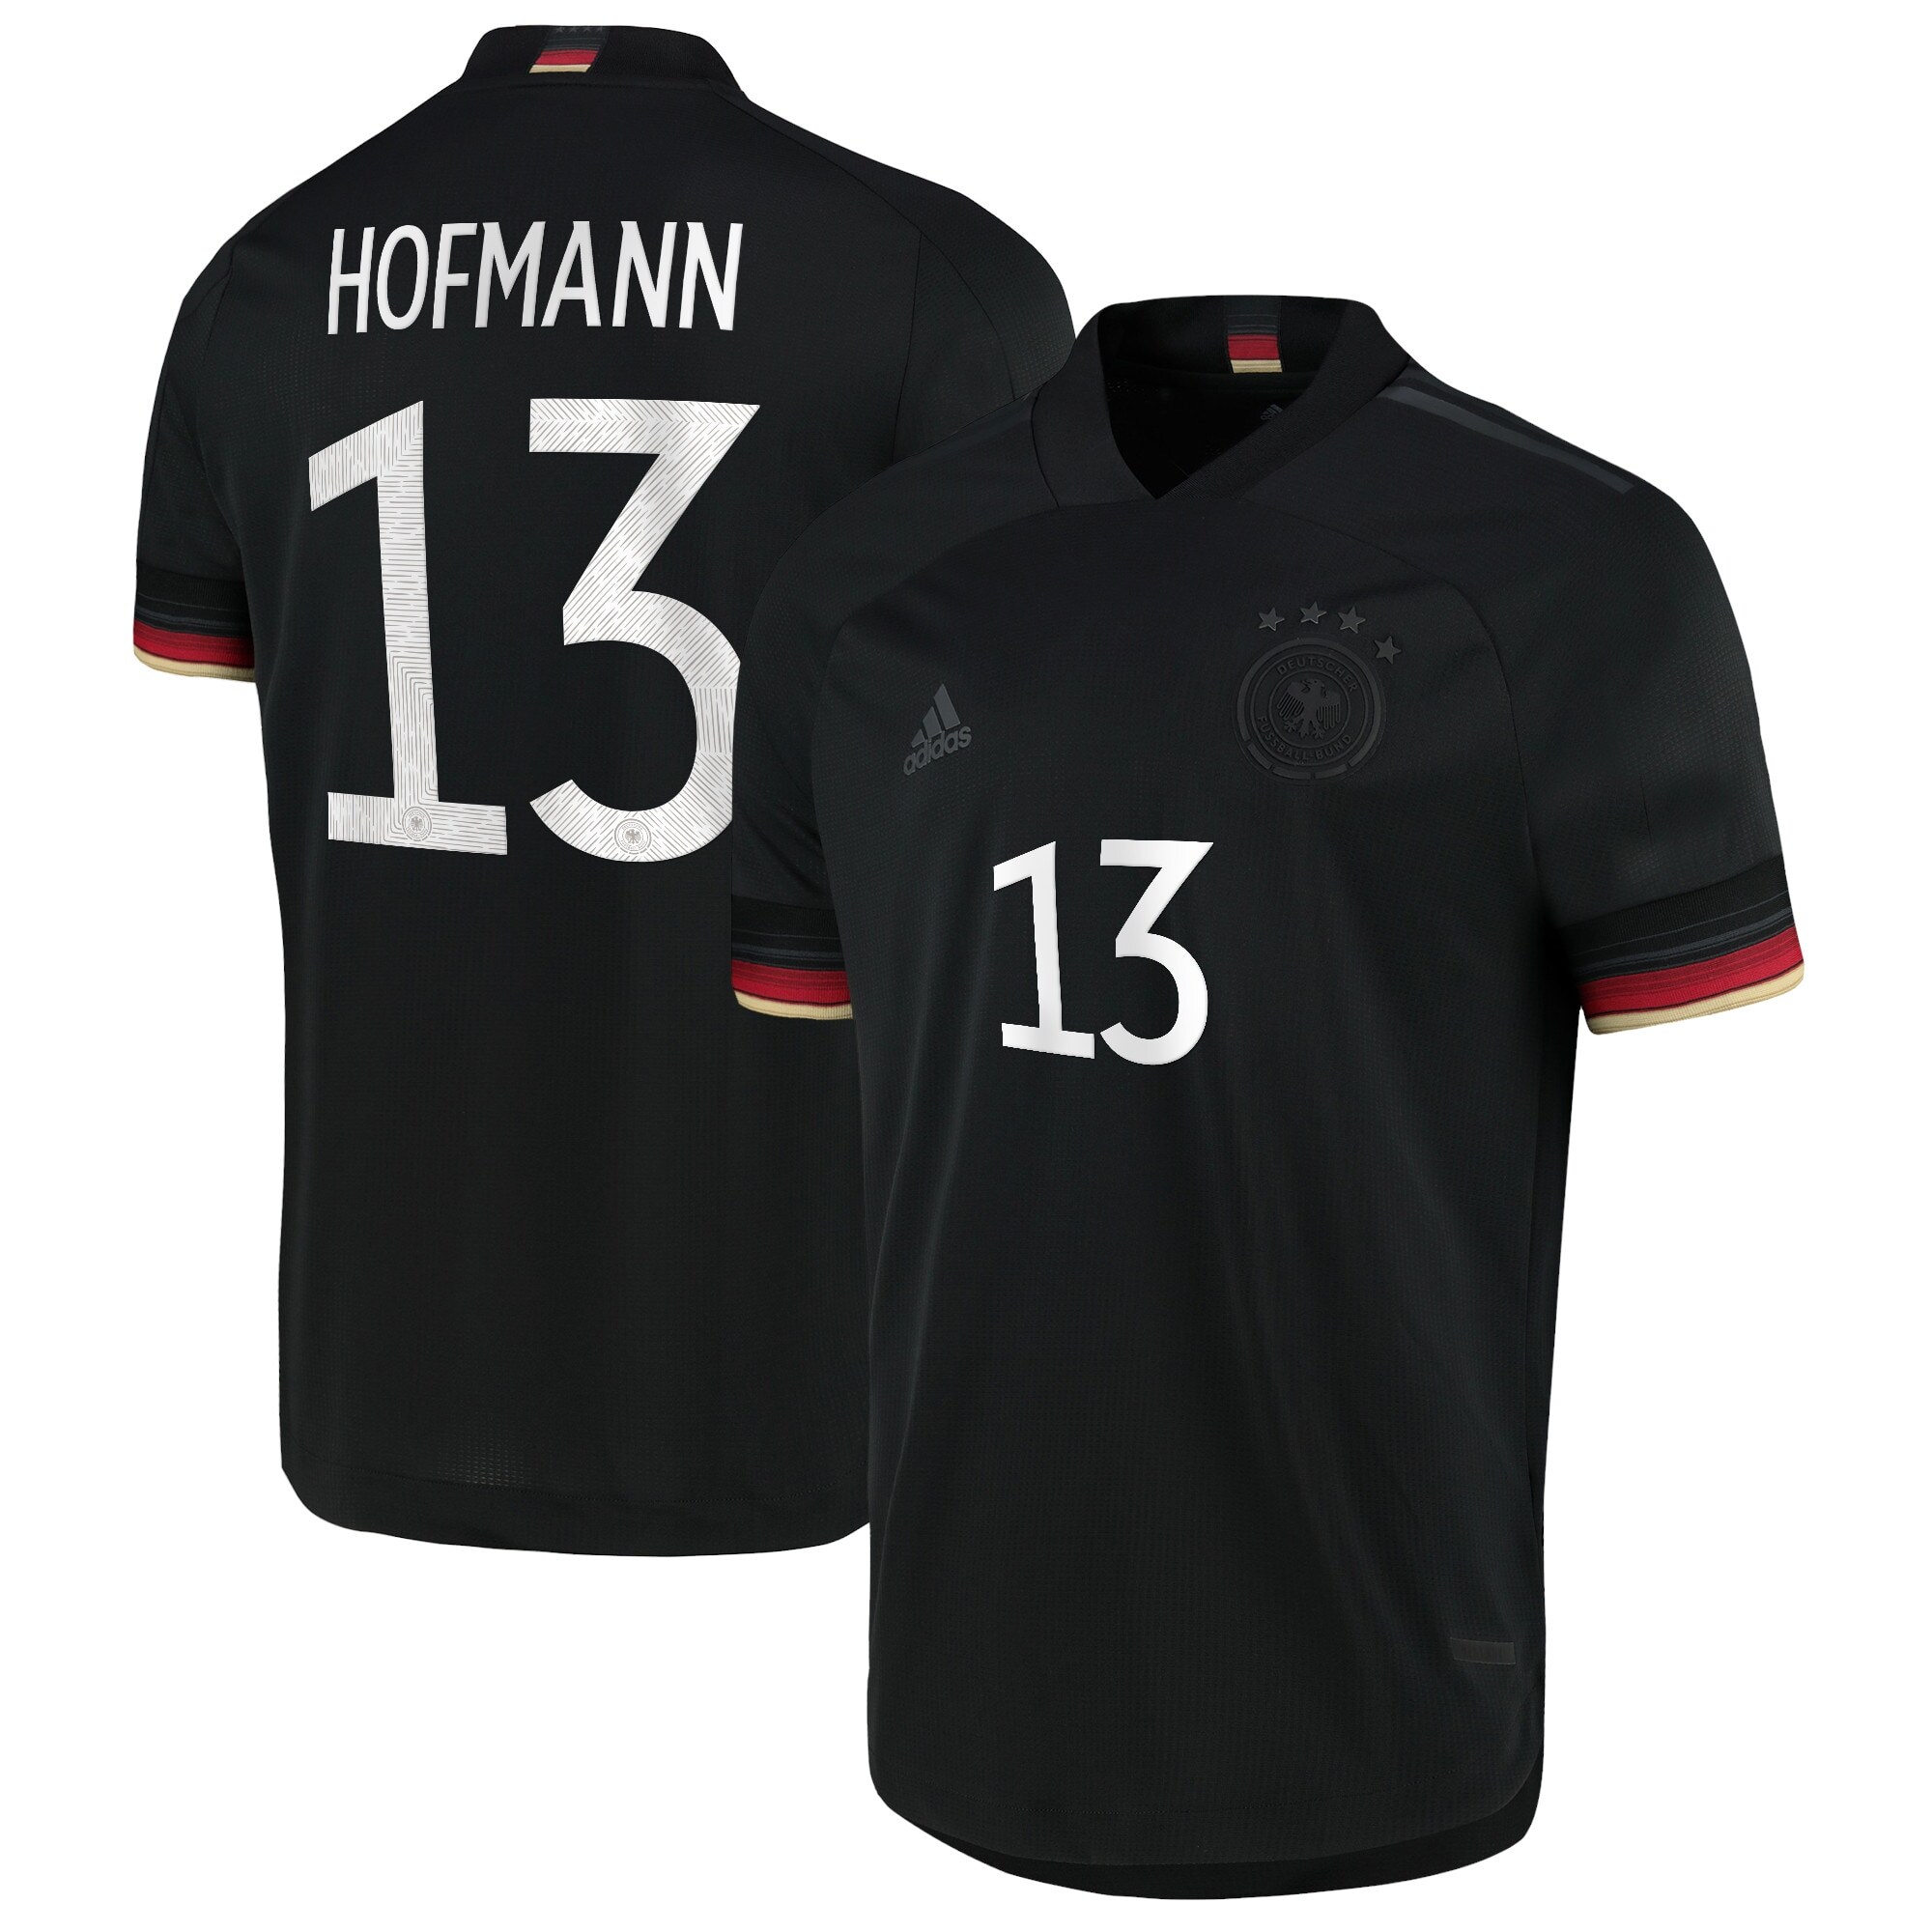 Germany Authentic Away Shirt 2021-22 with Hofmann 13 printing